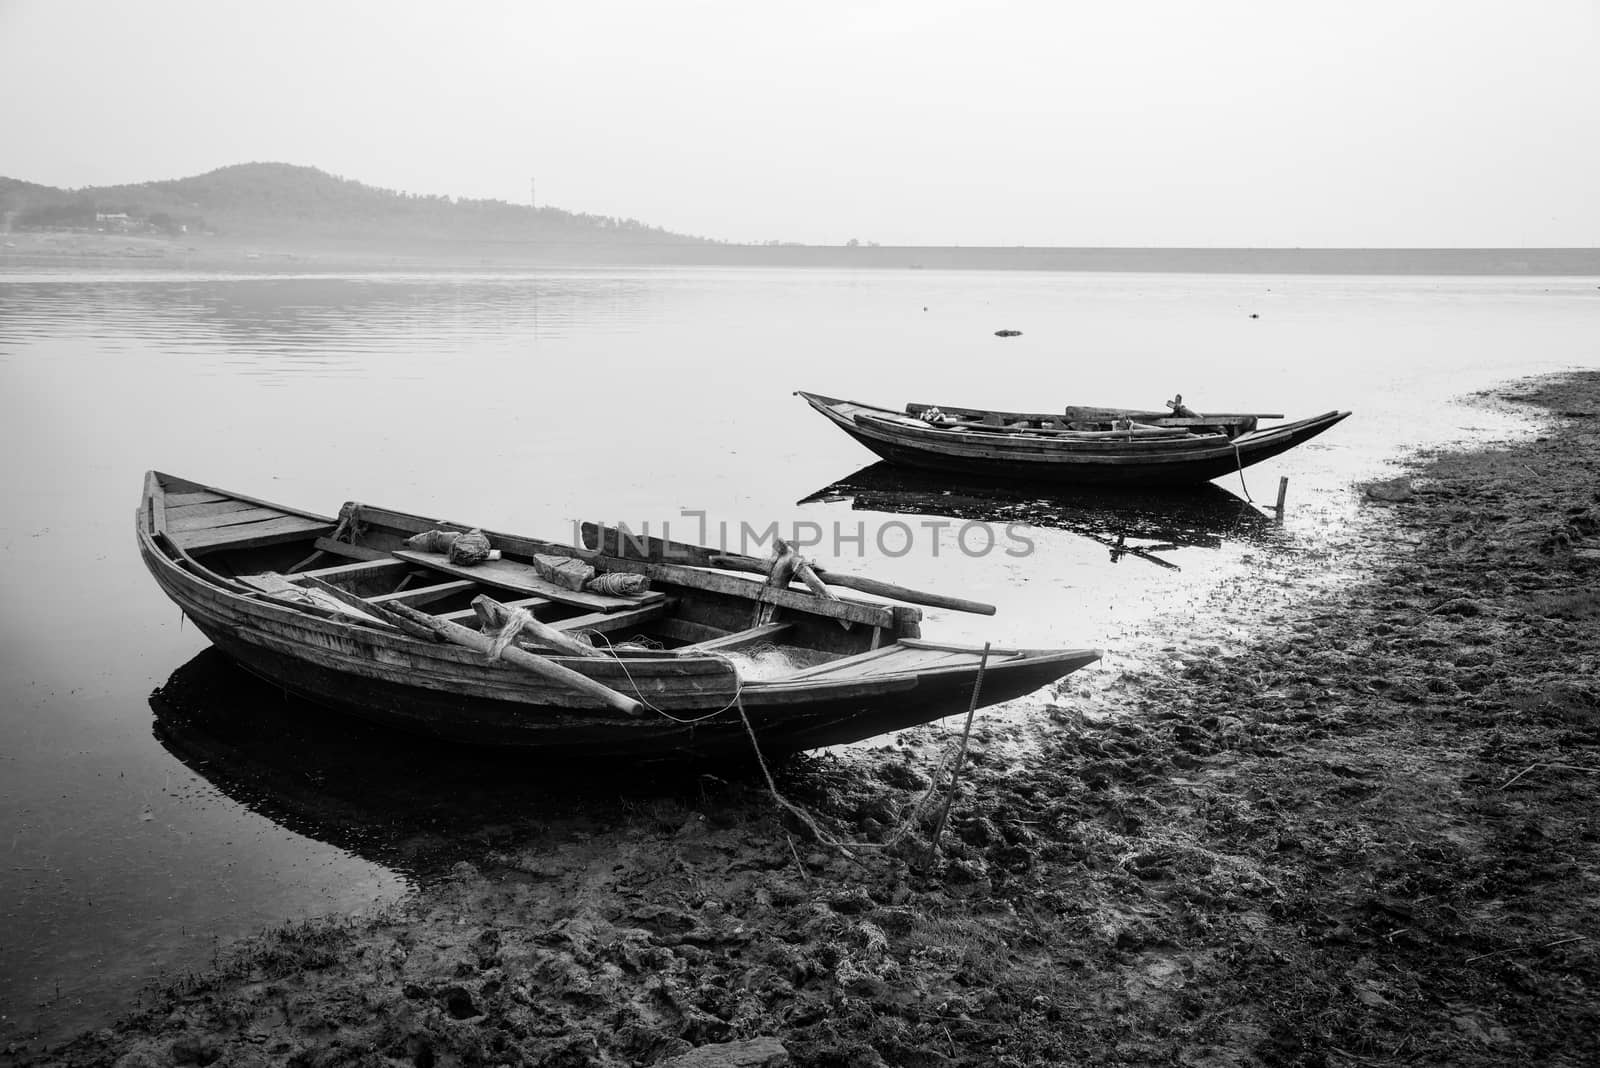 County fishing boats by neelsky